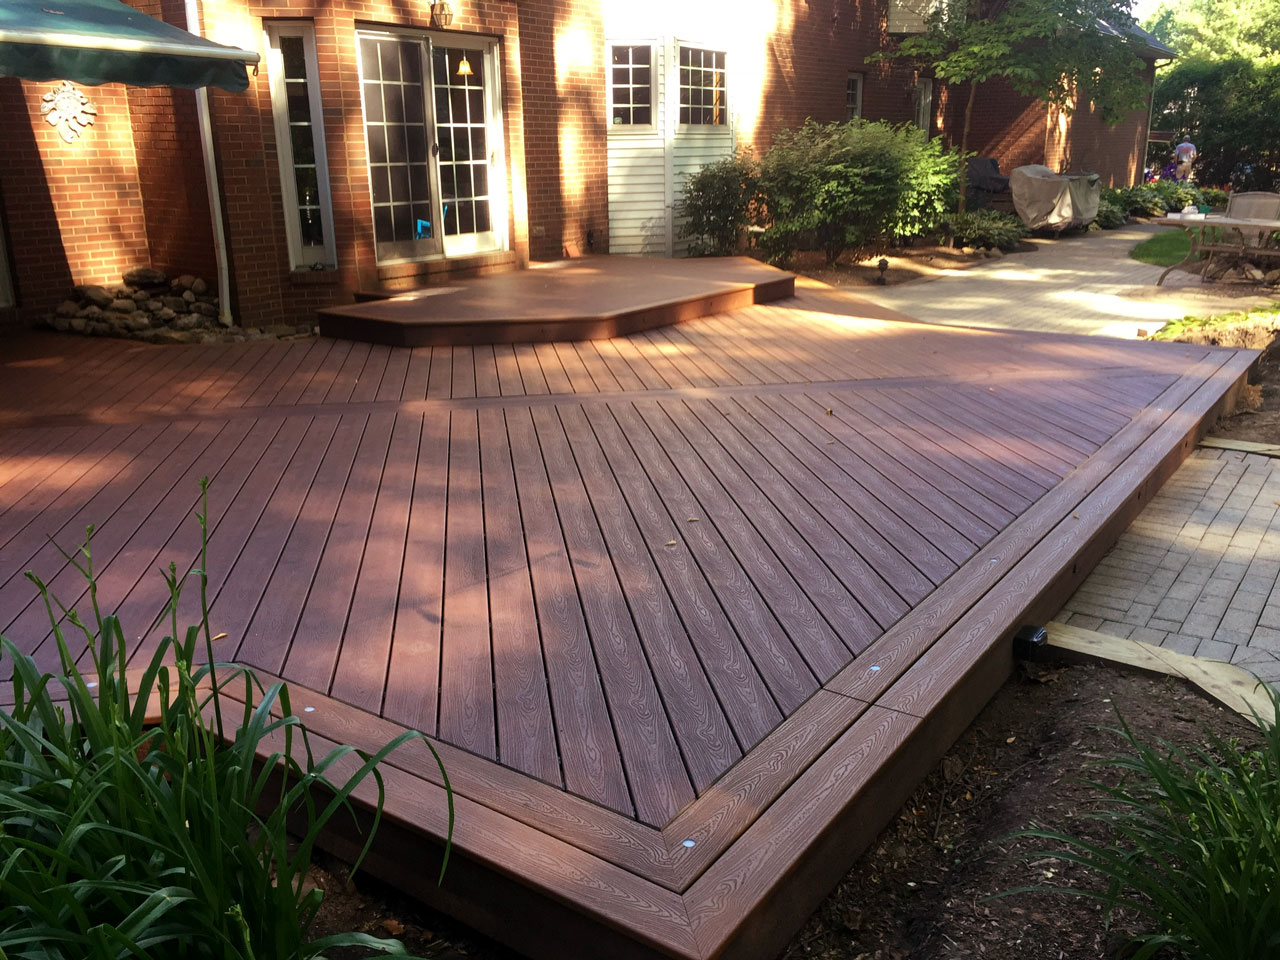 High quality deck construction by Deckmaster is the best